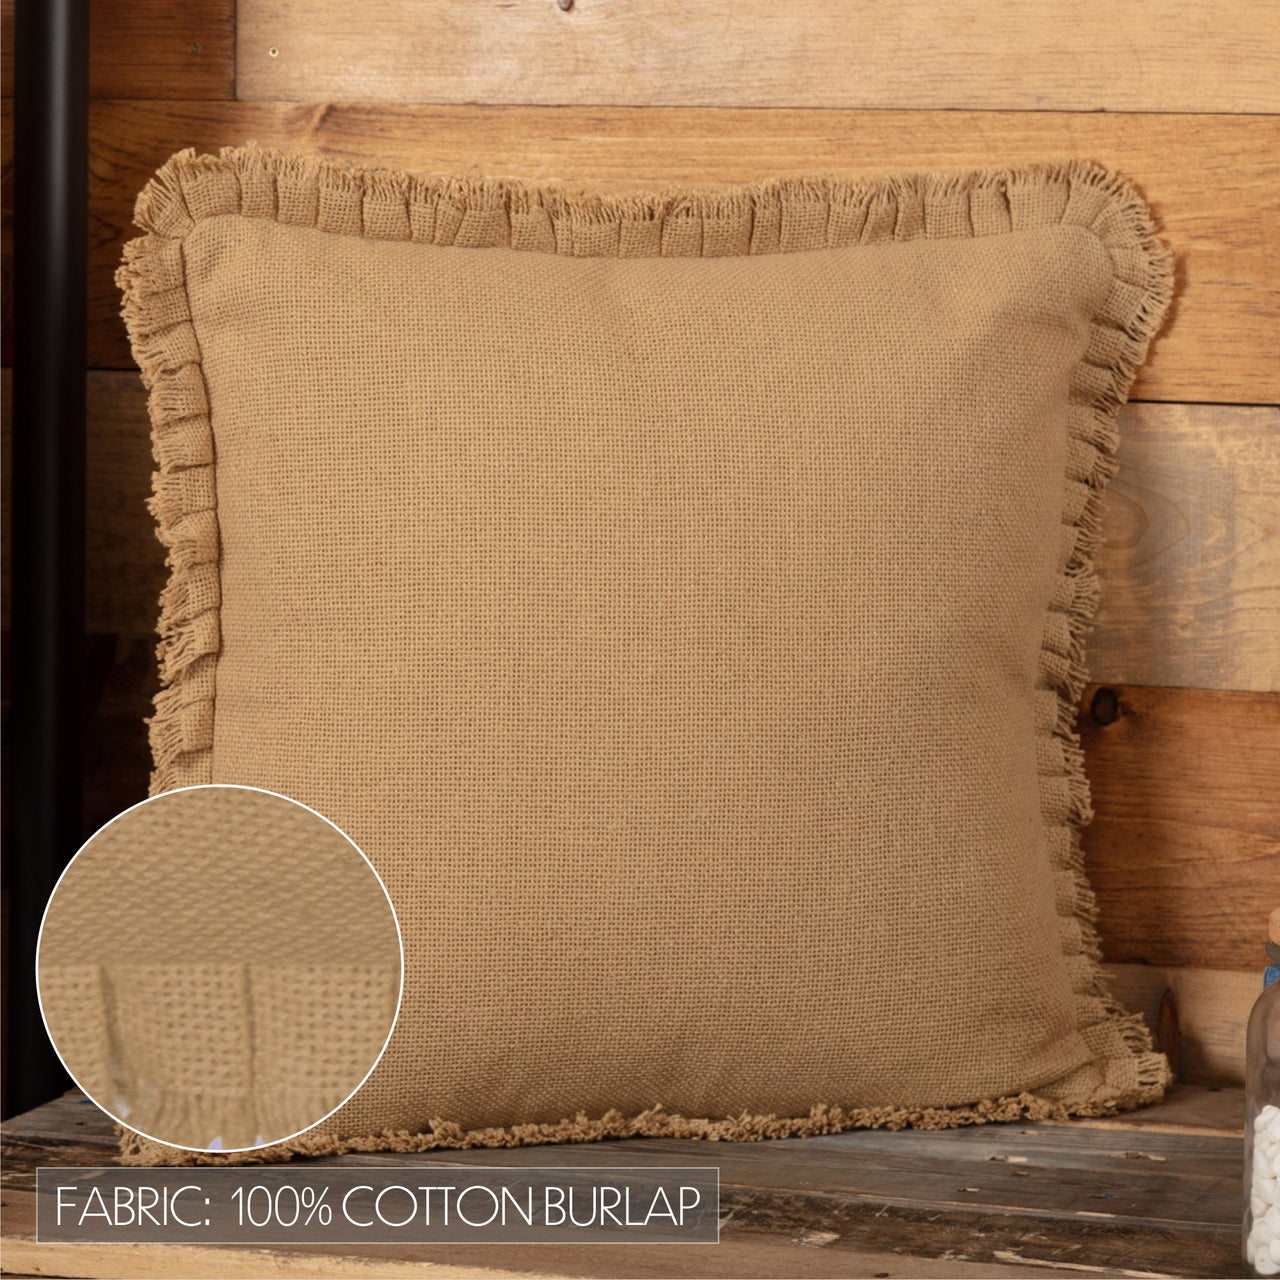 Burlap Natural Pillow w/ Fringed Ruffle 18x18 VHC Brands